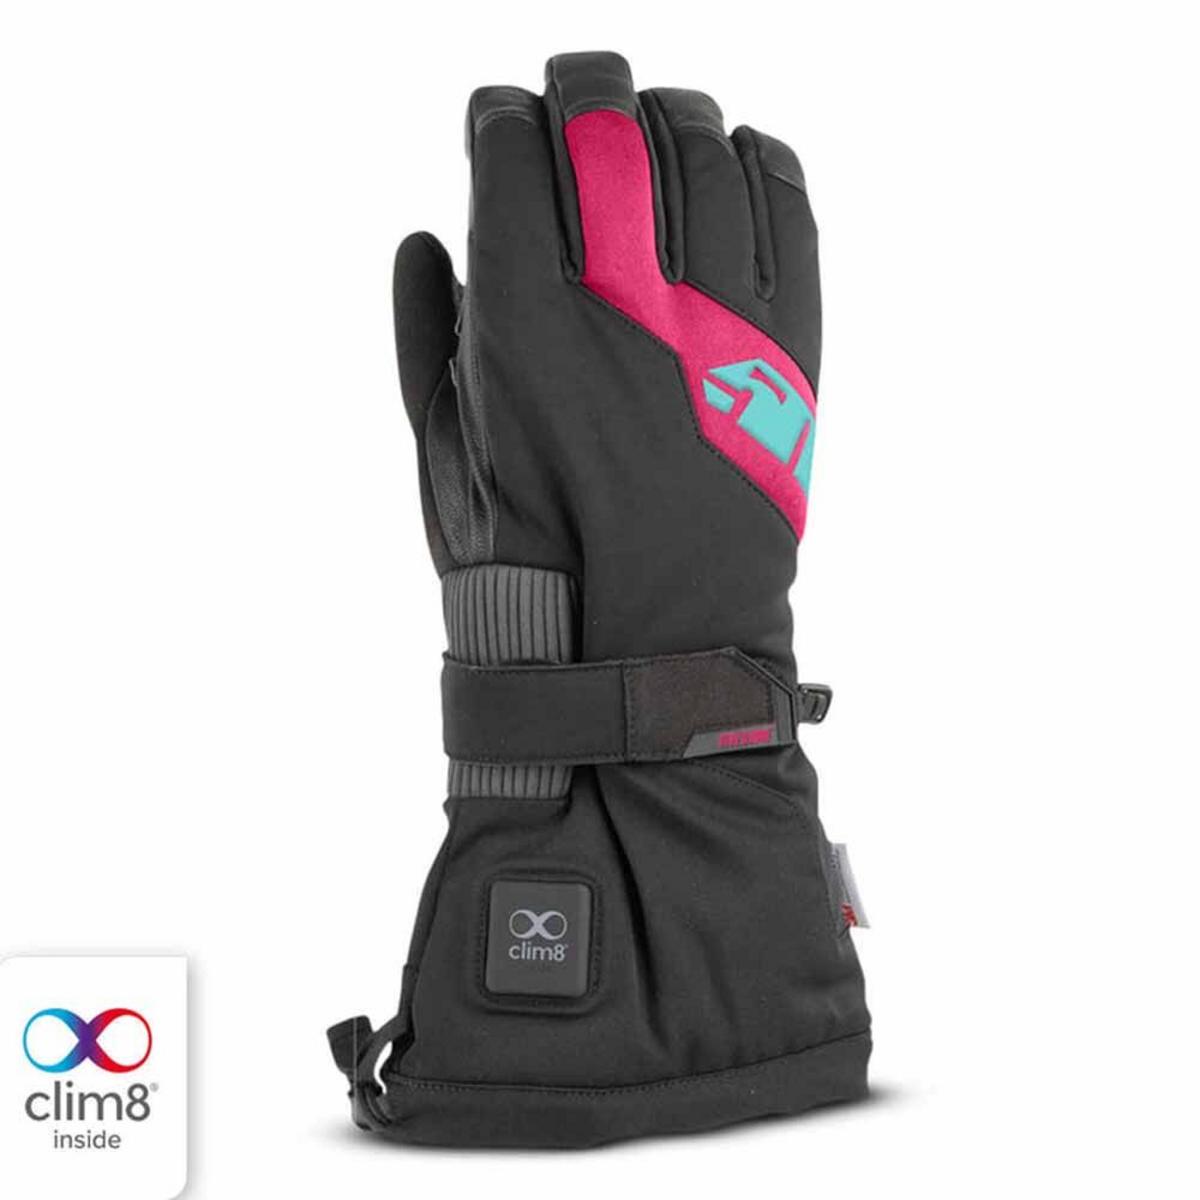 509 Backcountry Ignite Heated Gloves